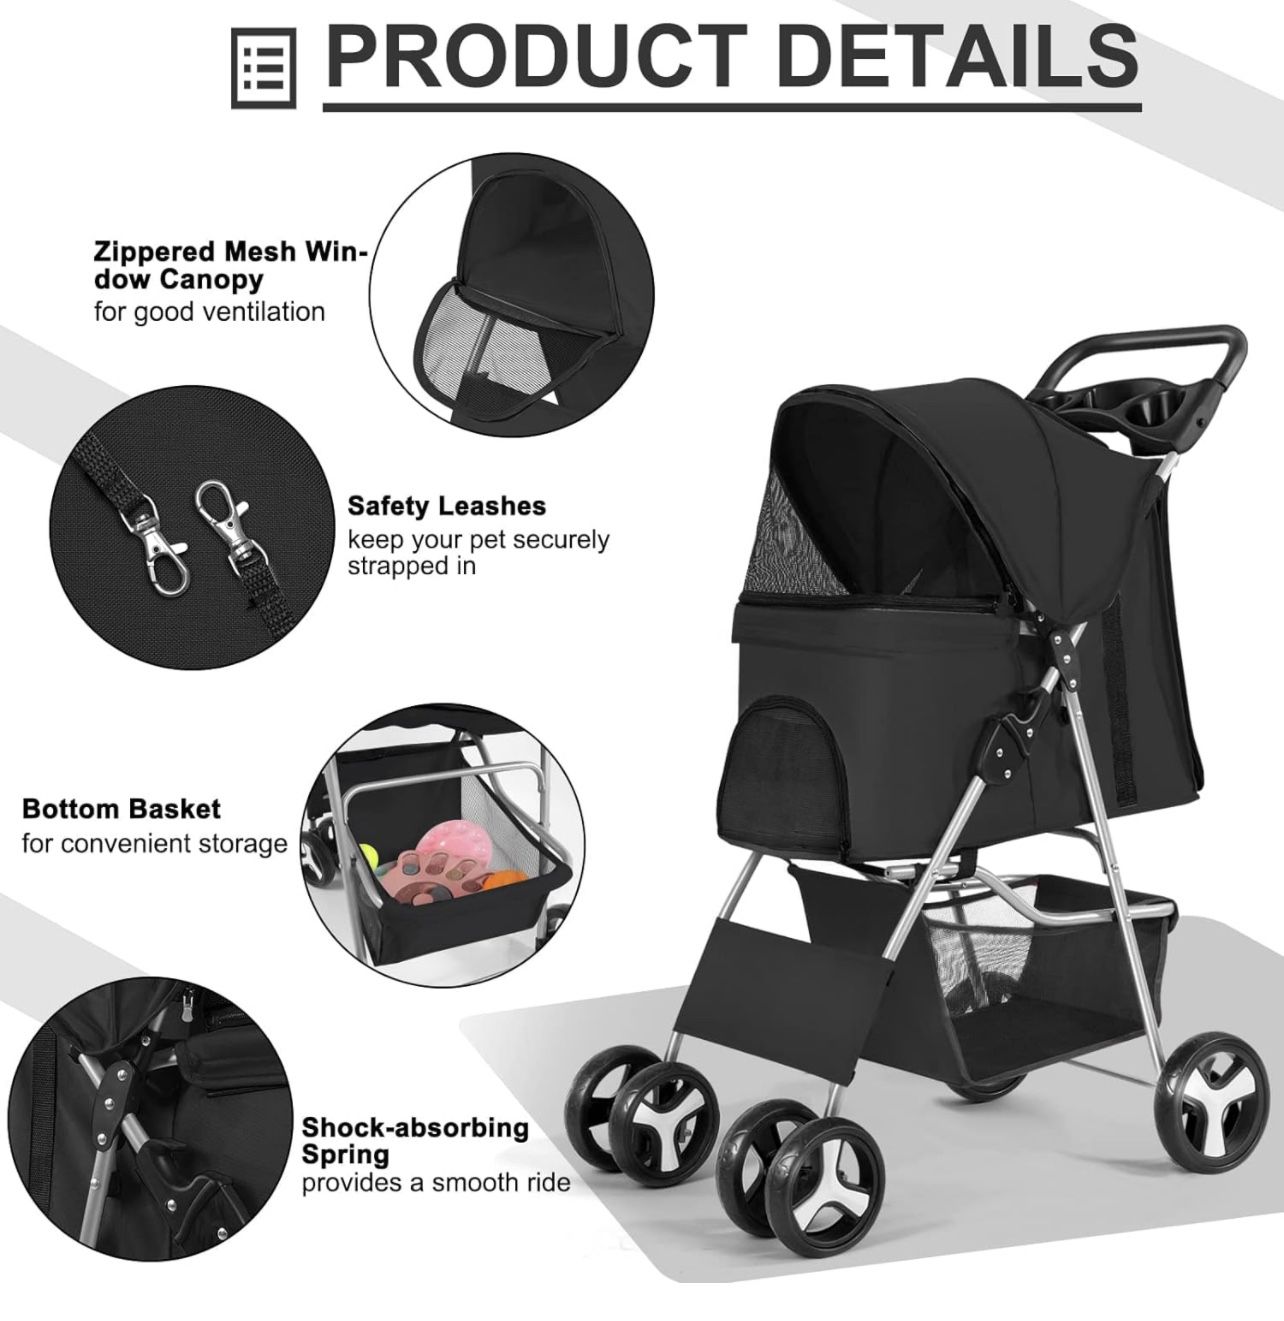 Pet Dog Stroller, Handle 360° Wheel Foldable Dogs Stroller with Storage Basket and Cup Holder for Small Medium Dogs & Cats